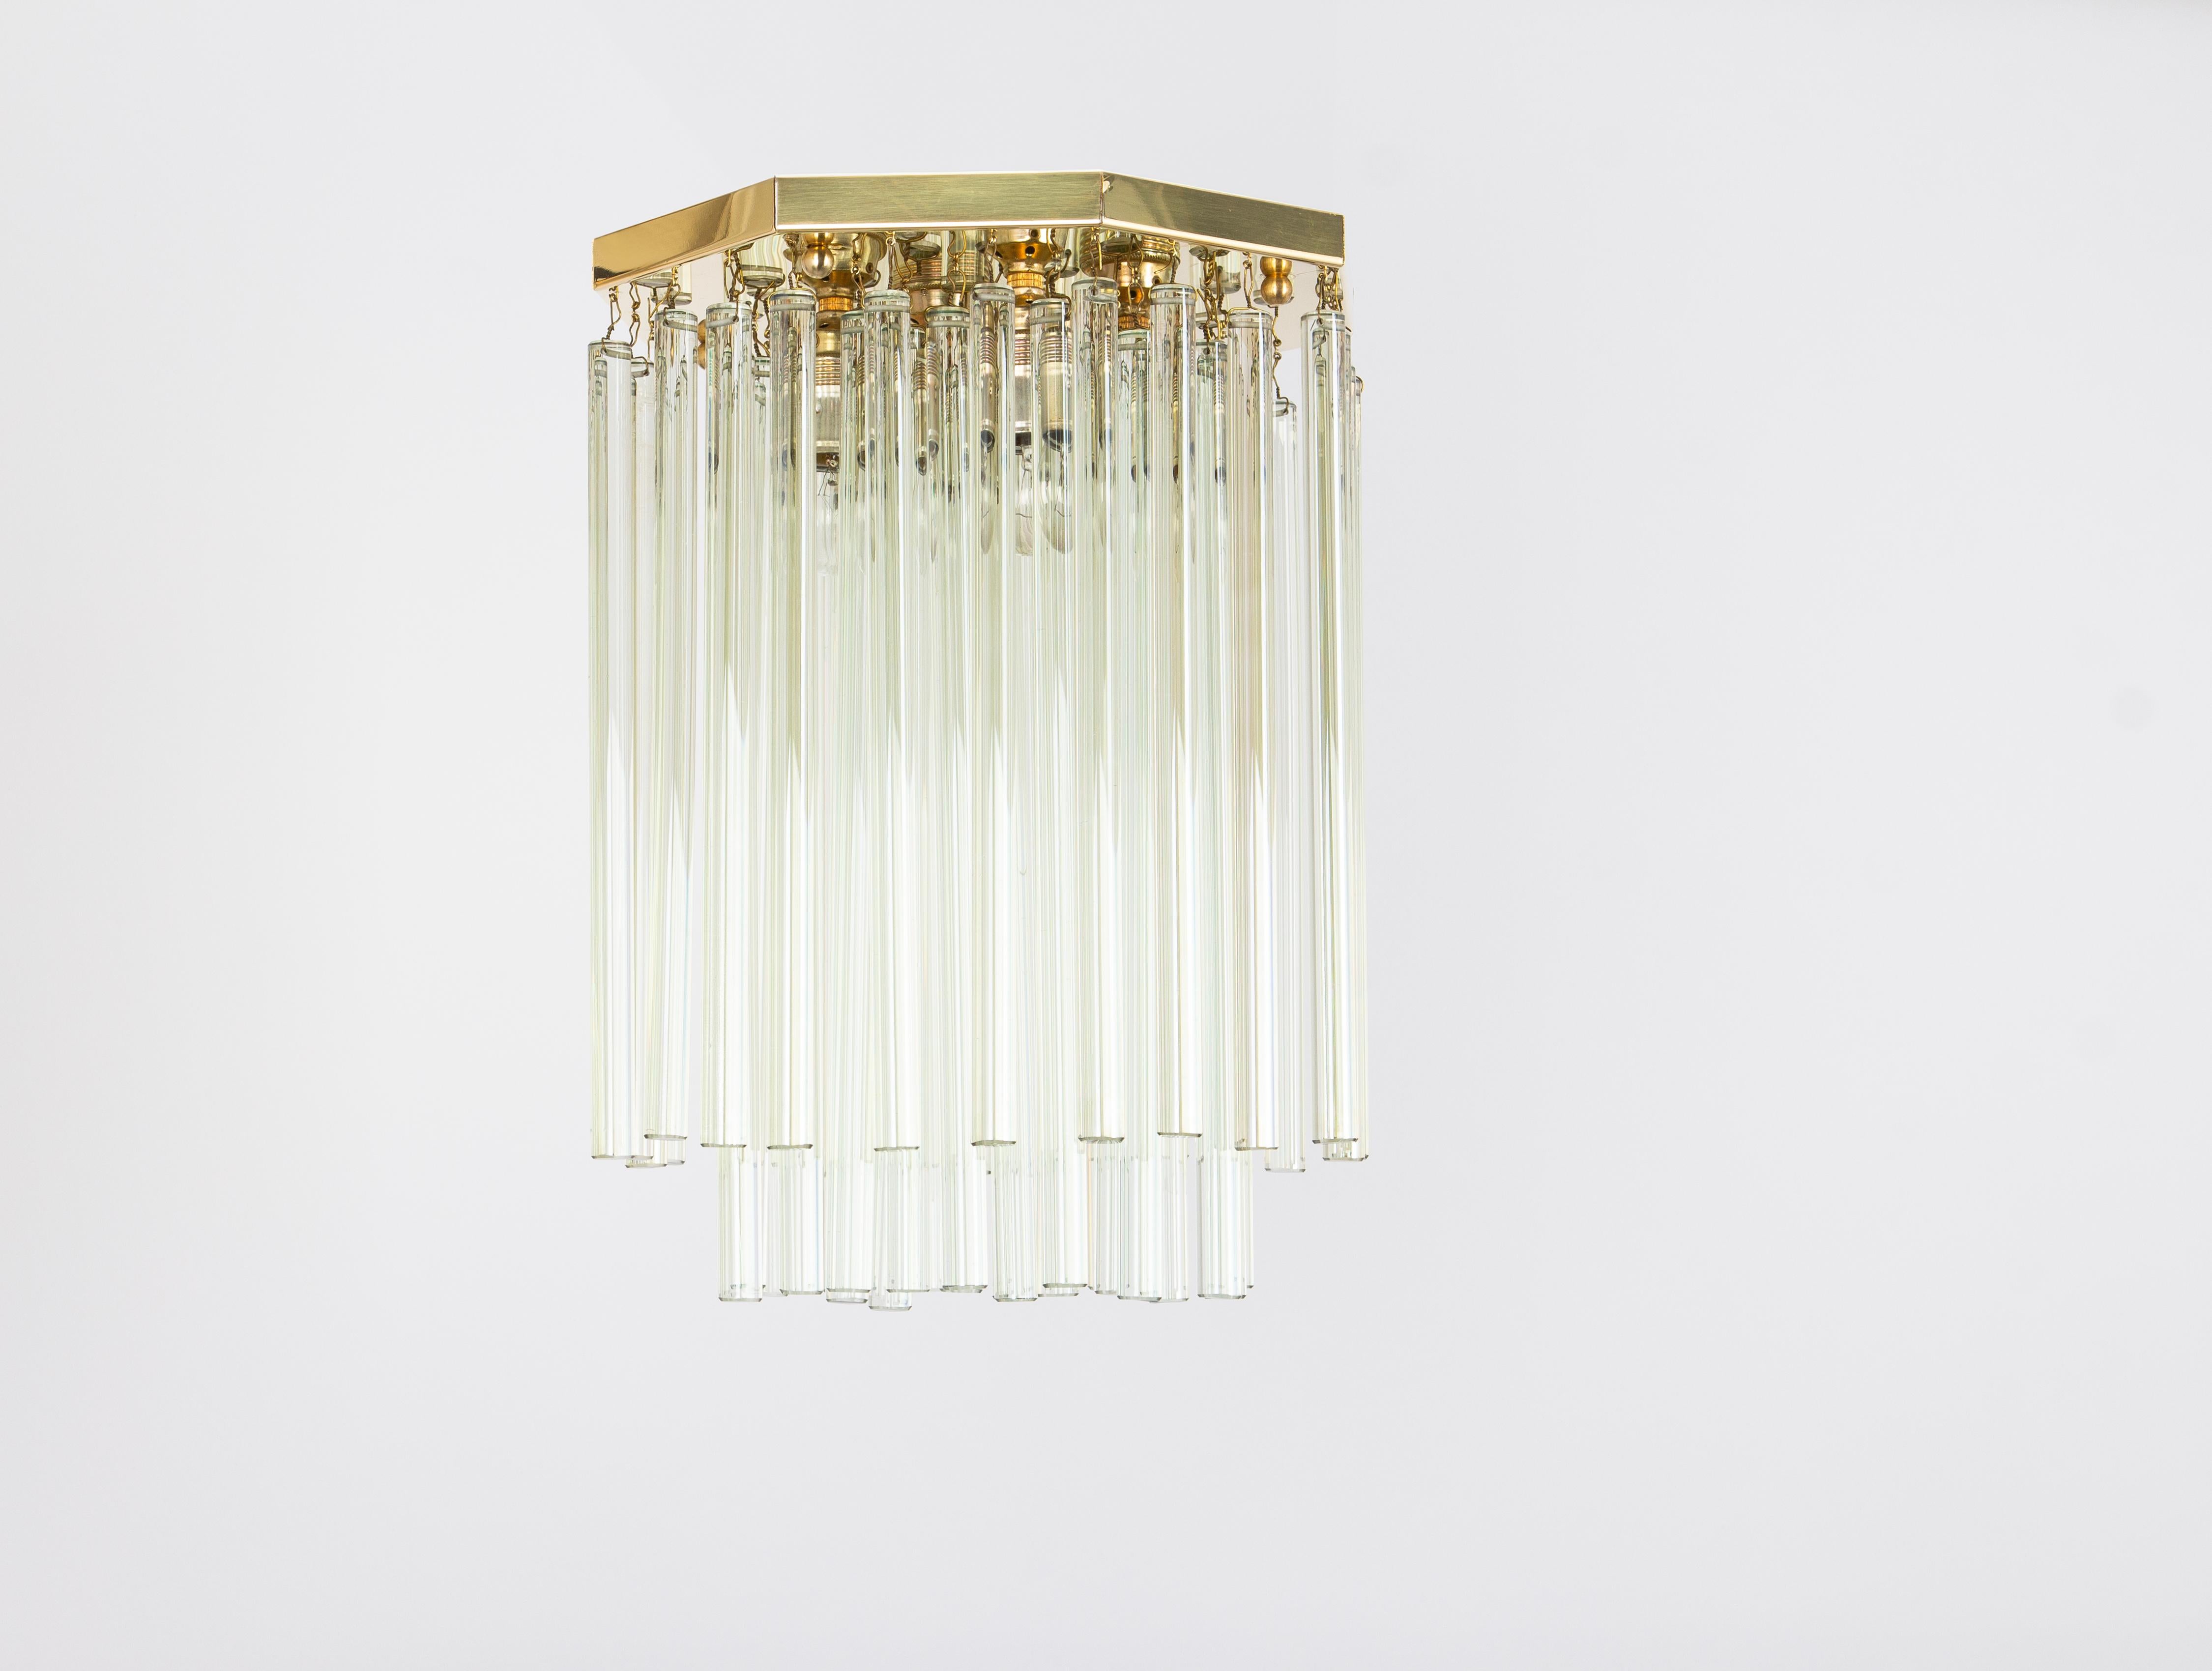 1 of 3 stunning Flush mount lights by Christoph Palme Germany, manufactured in 1970s. It’s composed of crystal glass rods on a brass frame.

Sockets: It needs 4 x E27 standard small bulbs ( max. 80 Watts each)
Light bulbs are not included. It is